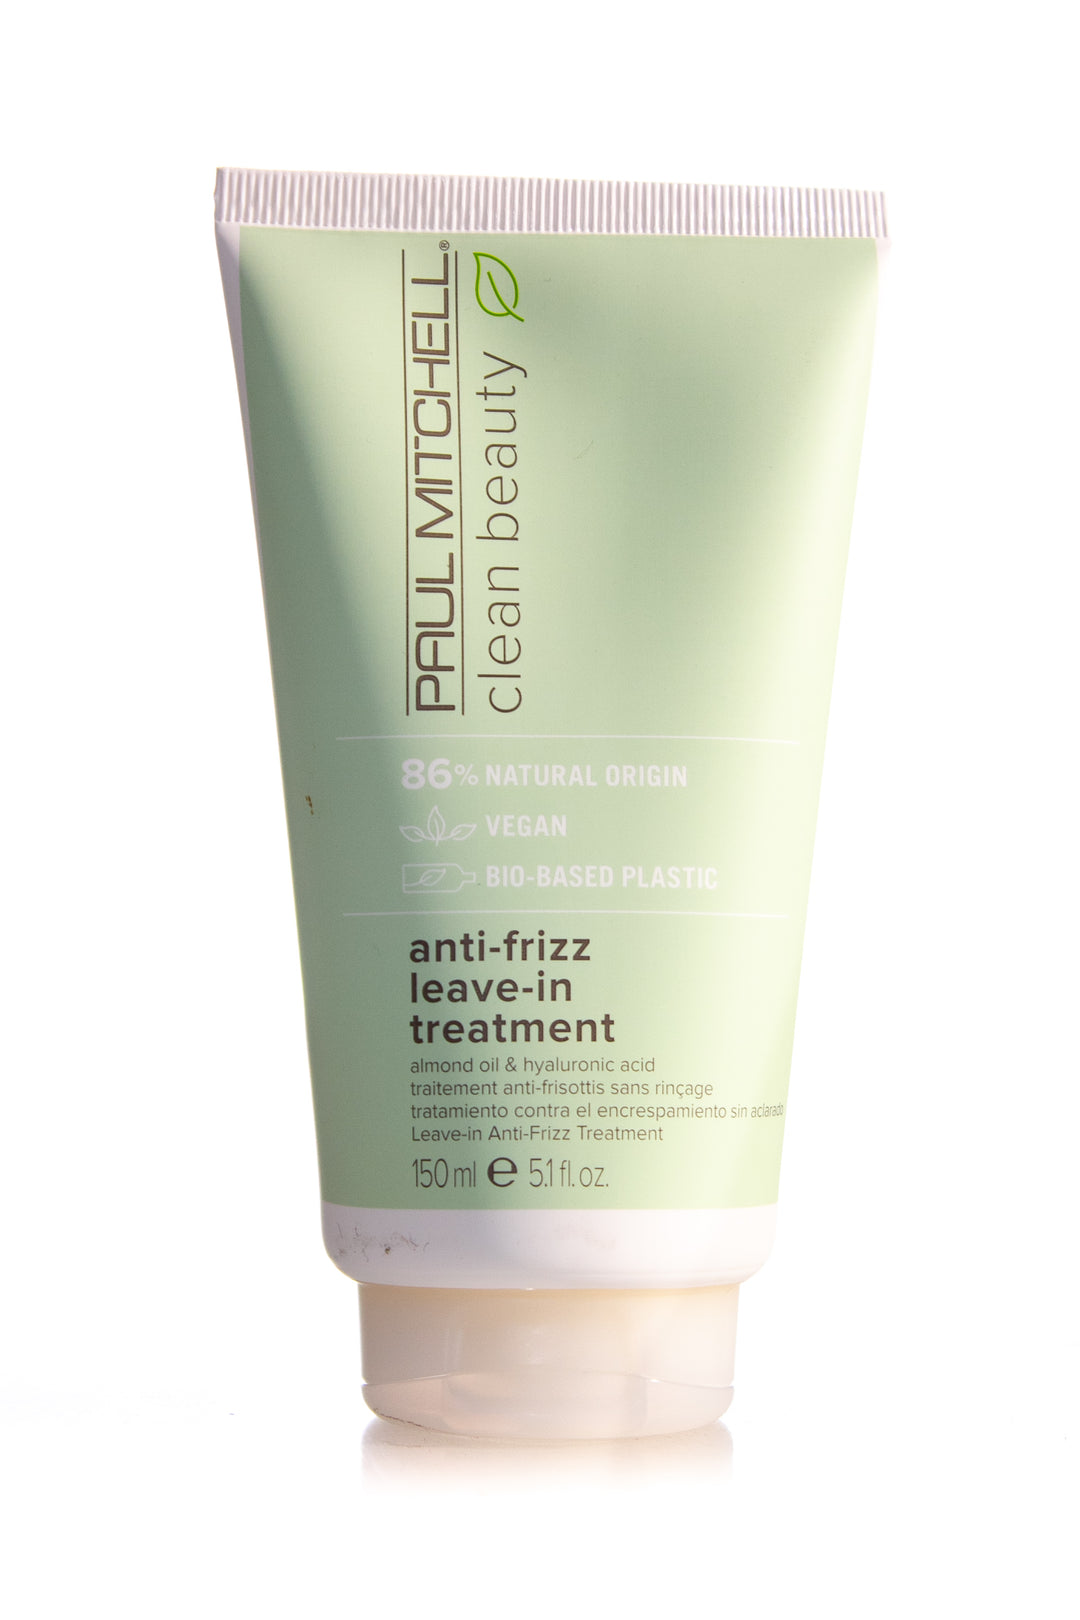 PAUL MITCHELL Clean Beauty Anti-Frizz Leave-In Treatment | 150ml